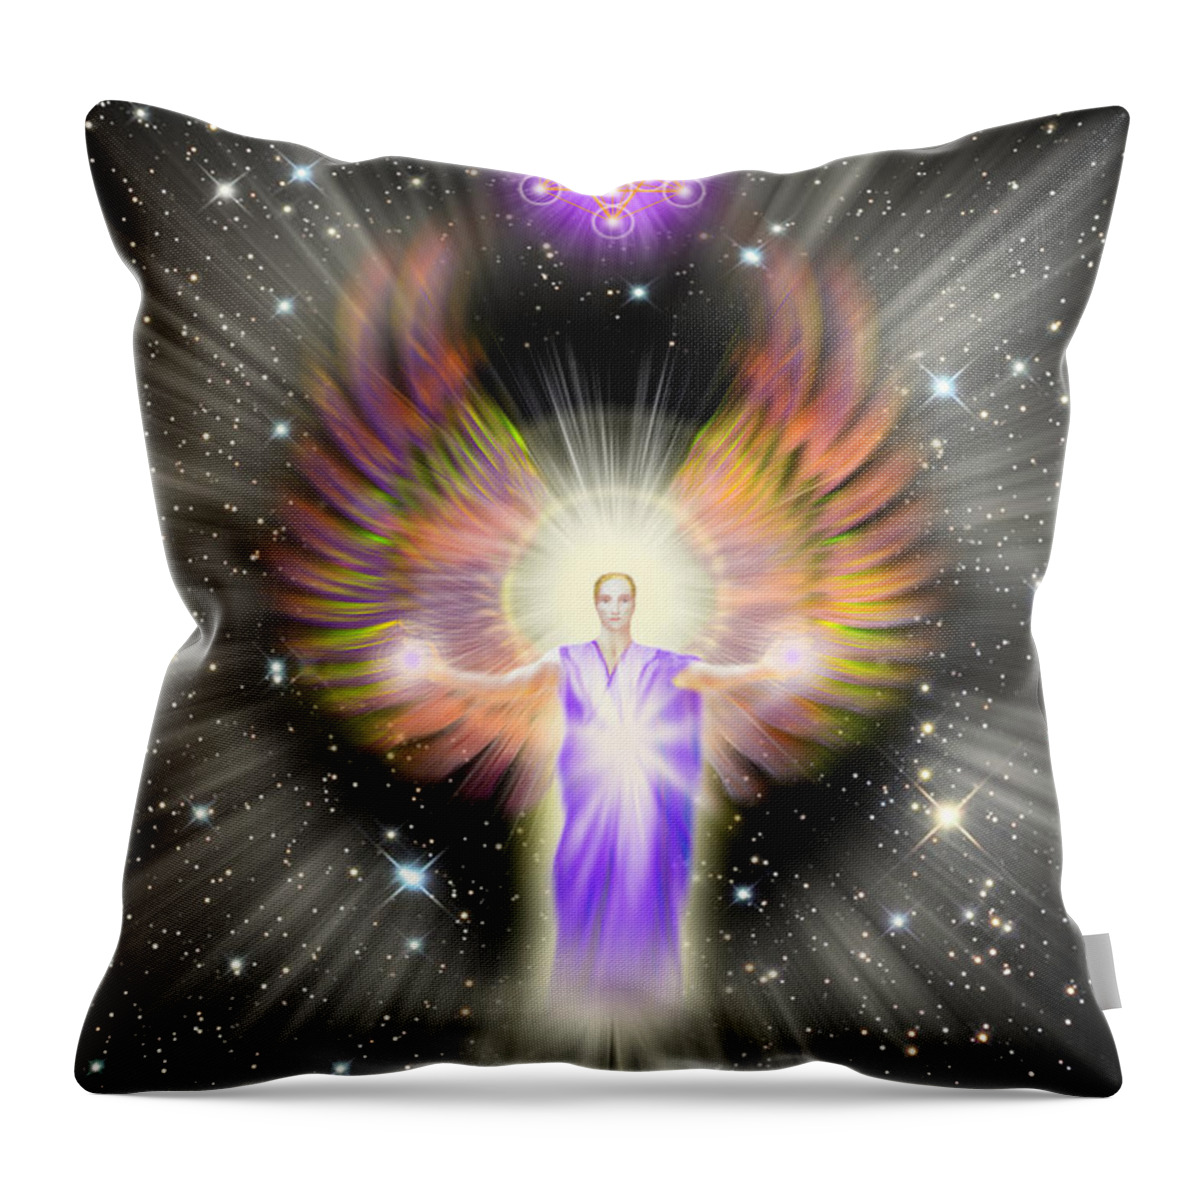 Metatron Throw Pillow featuring the digital art Metatron With Stars by Endre Balogh